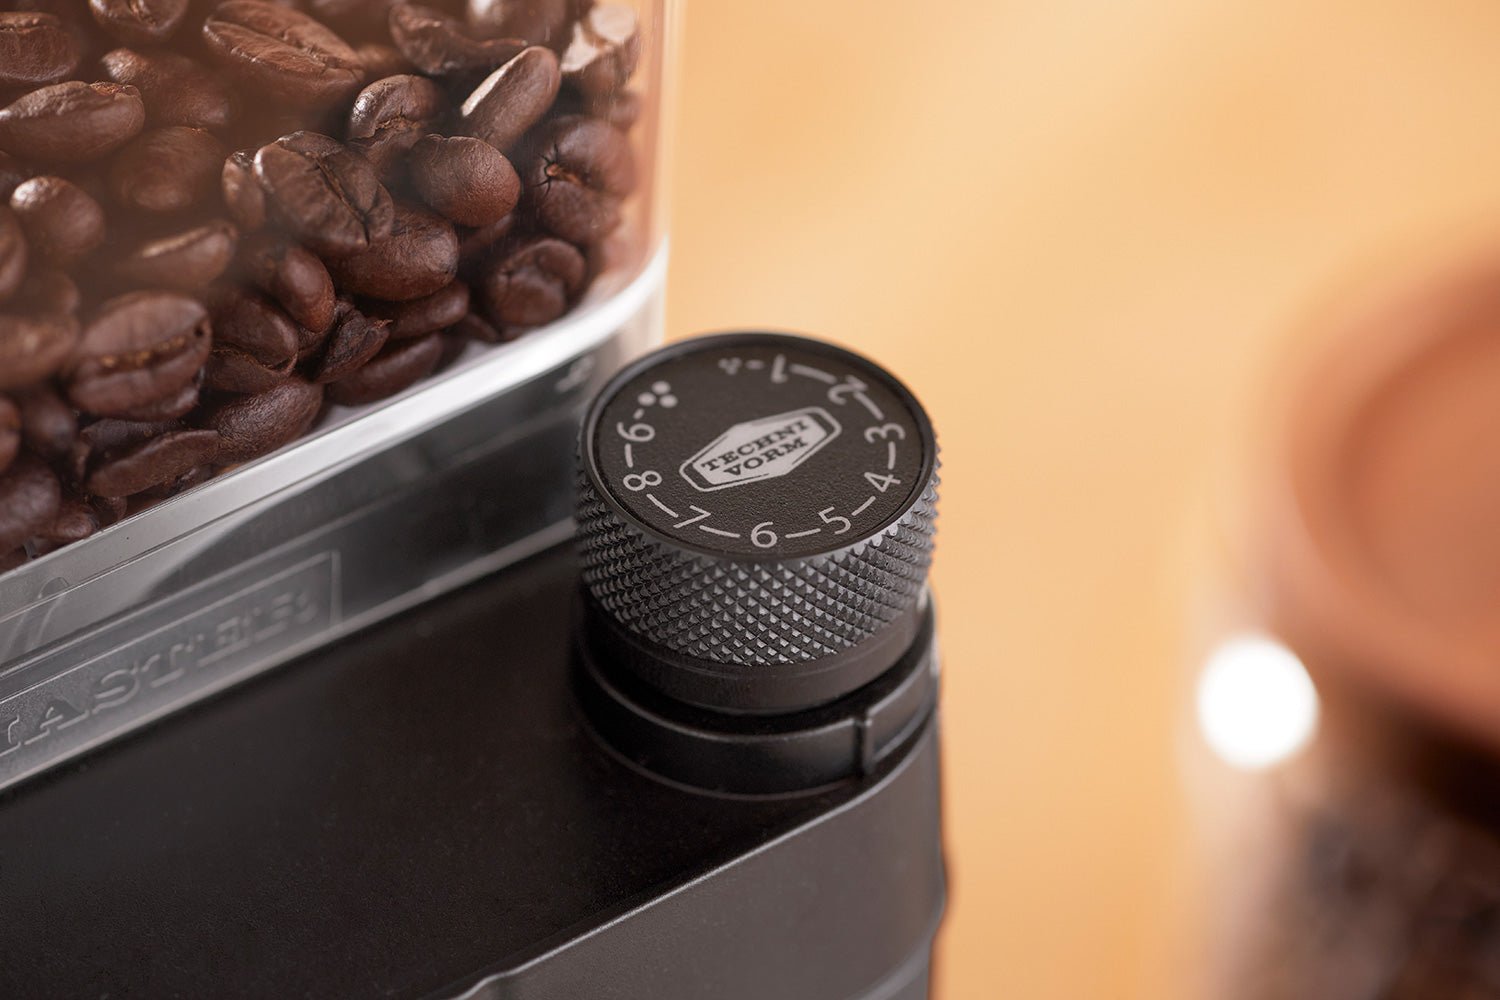 Dialing in Your Grind Size on the KM5 Burr Grinder